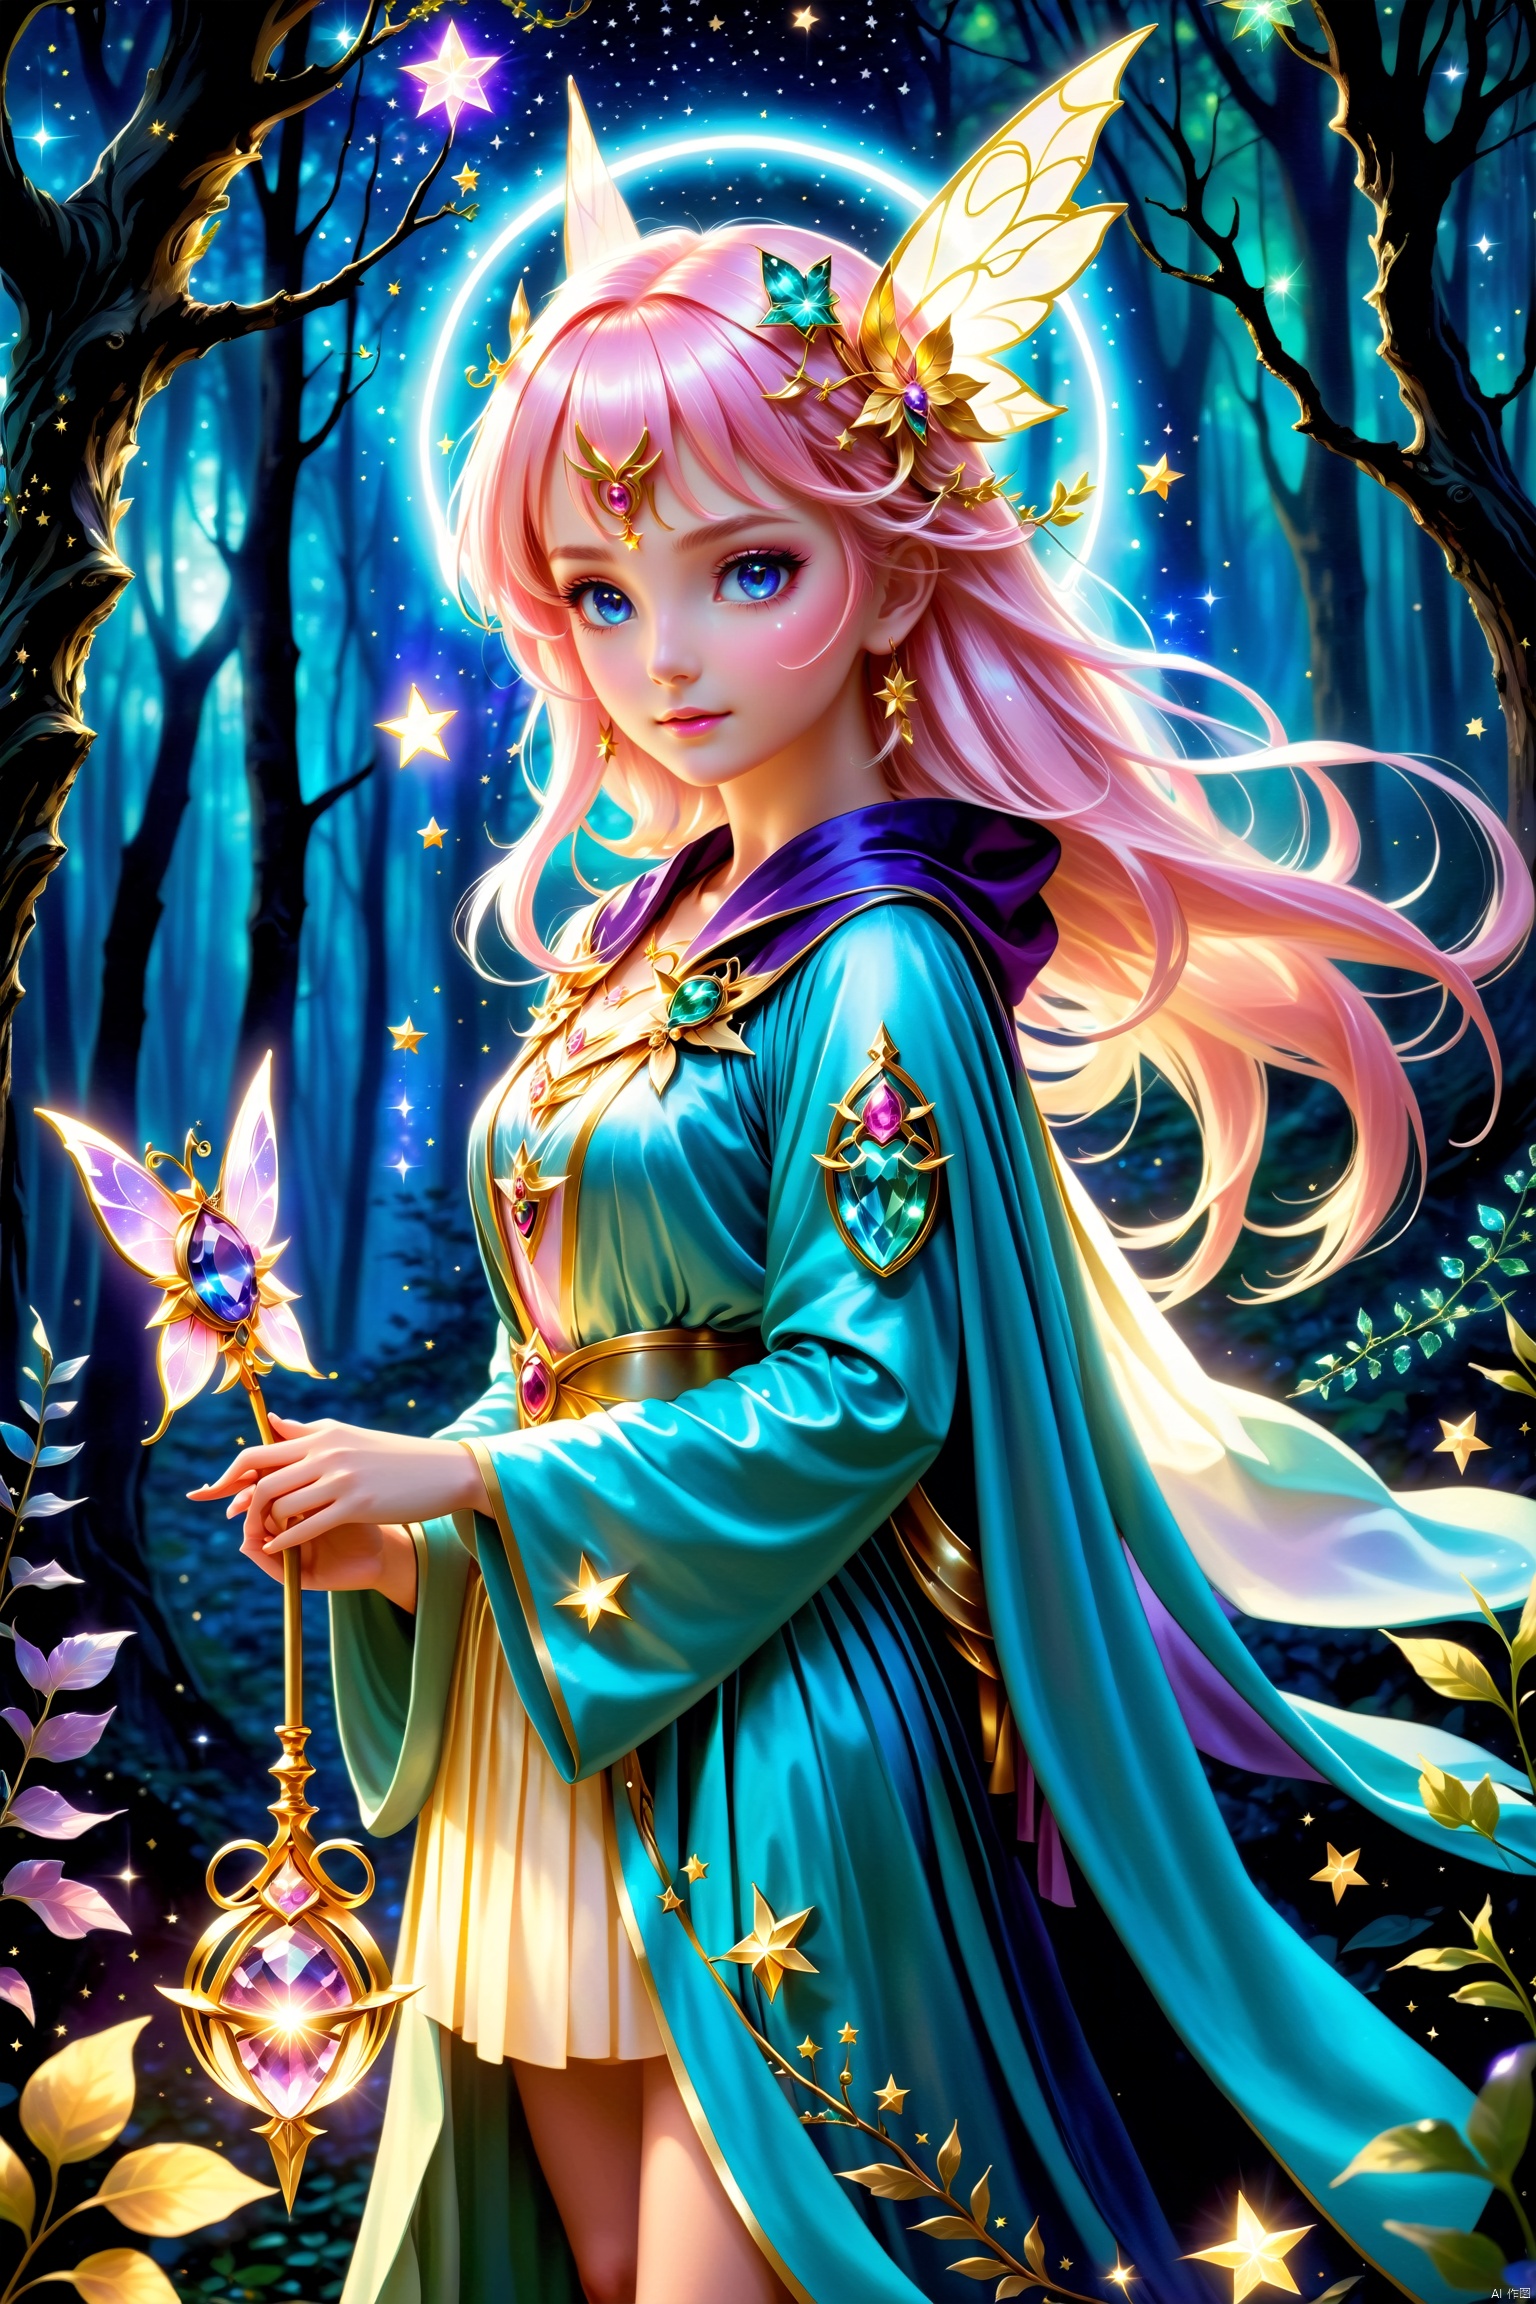 A magical girl stands amidst a mystical forest, her eyes gleaming with the light of the stars, as if she can peer into the secrets of magic. She is clad in a flowing magical robe, adorned with various enigmatic symbols that shimmer with a mysterious glow under the moonlight. In her hand, she holds a delicate wand, topped with a radiant gemstone that emits a soft light. Around her, a group of fairy-like creatures hover, seemingly awaiting her next magical command. The magical girl's face is filled with confidence and determination, ready to embrace the adventure that lies ahead.